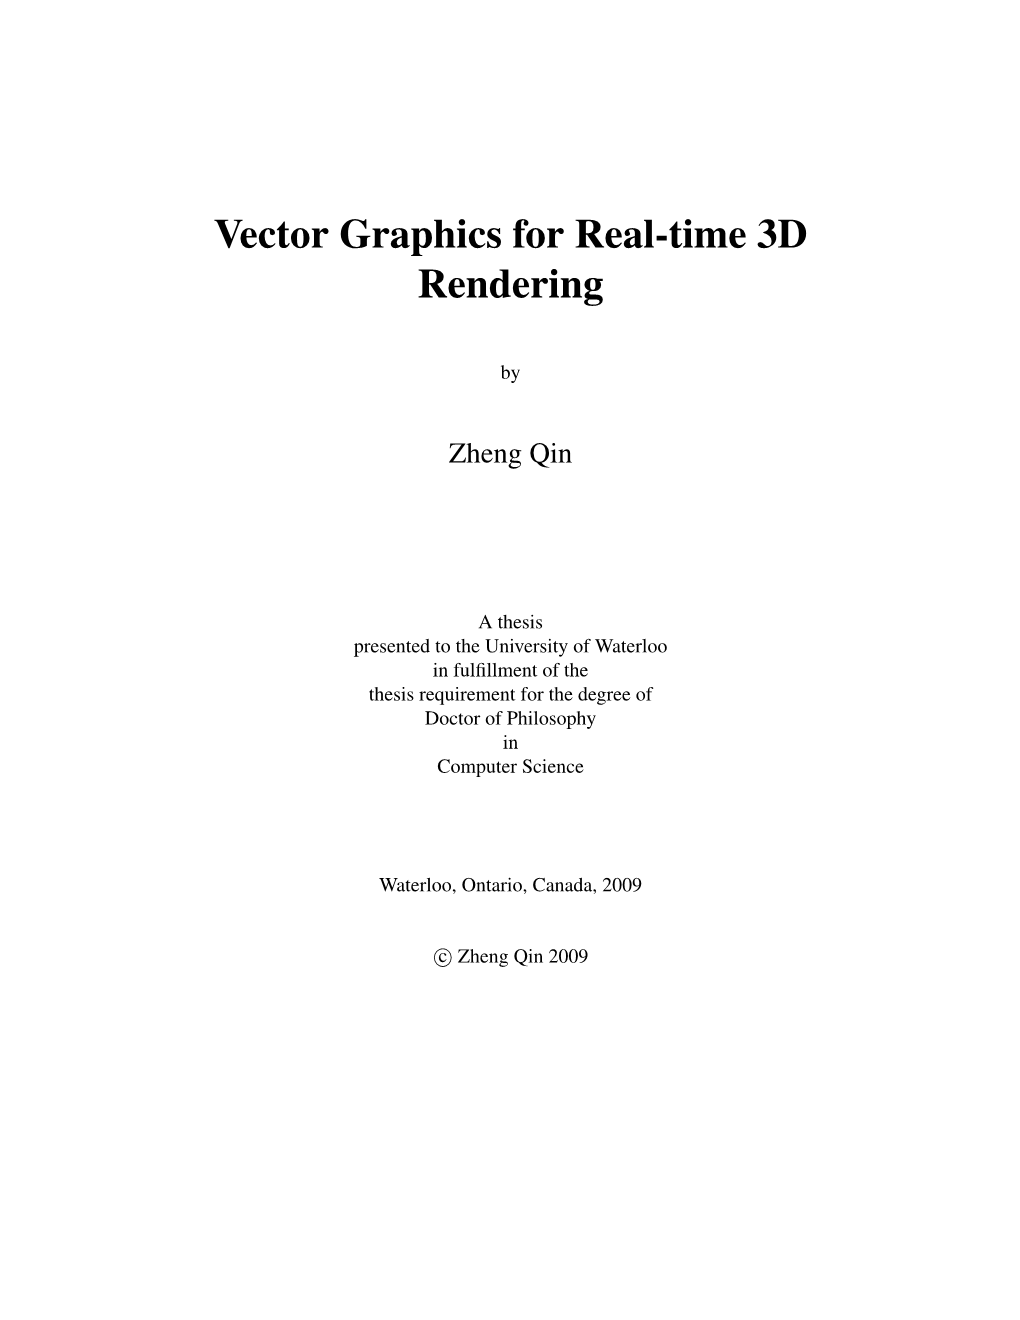 Vector Graphics for Real-Time 3D Rendering